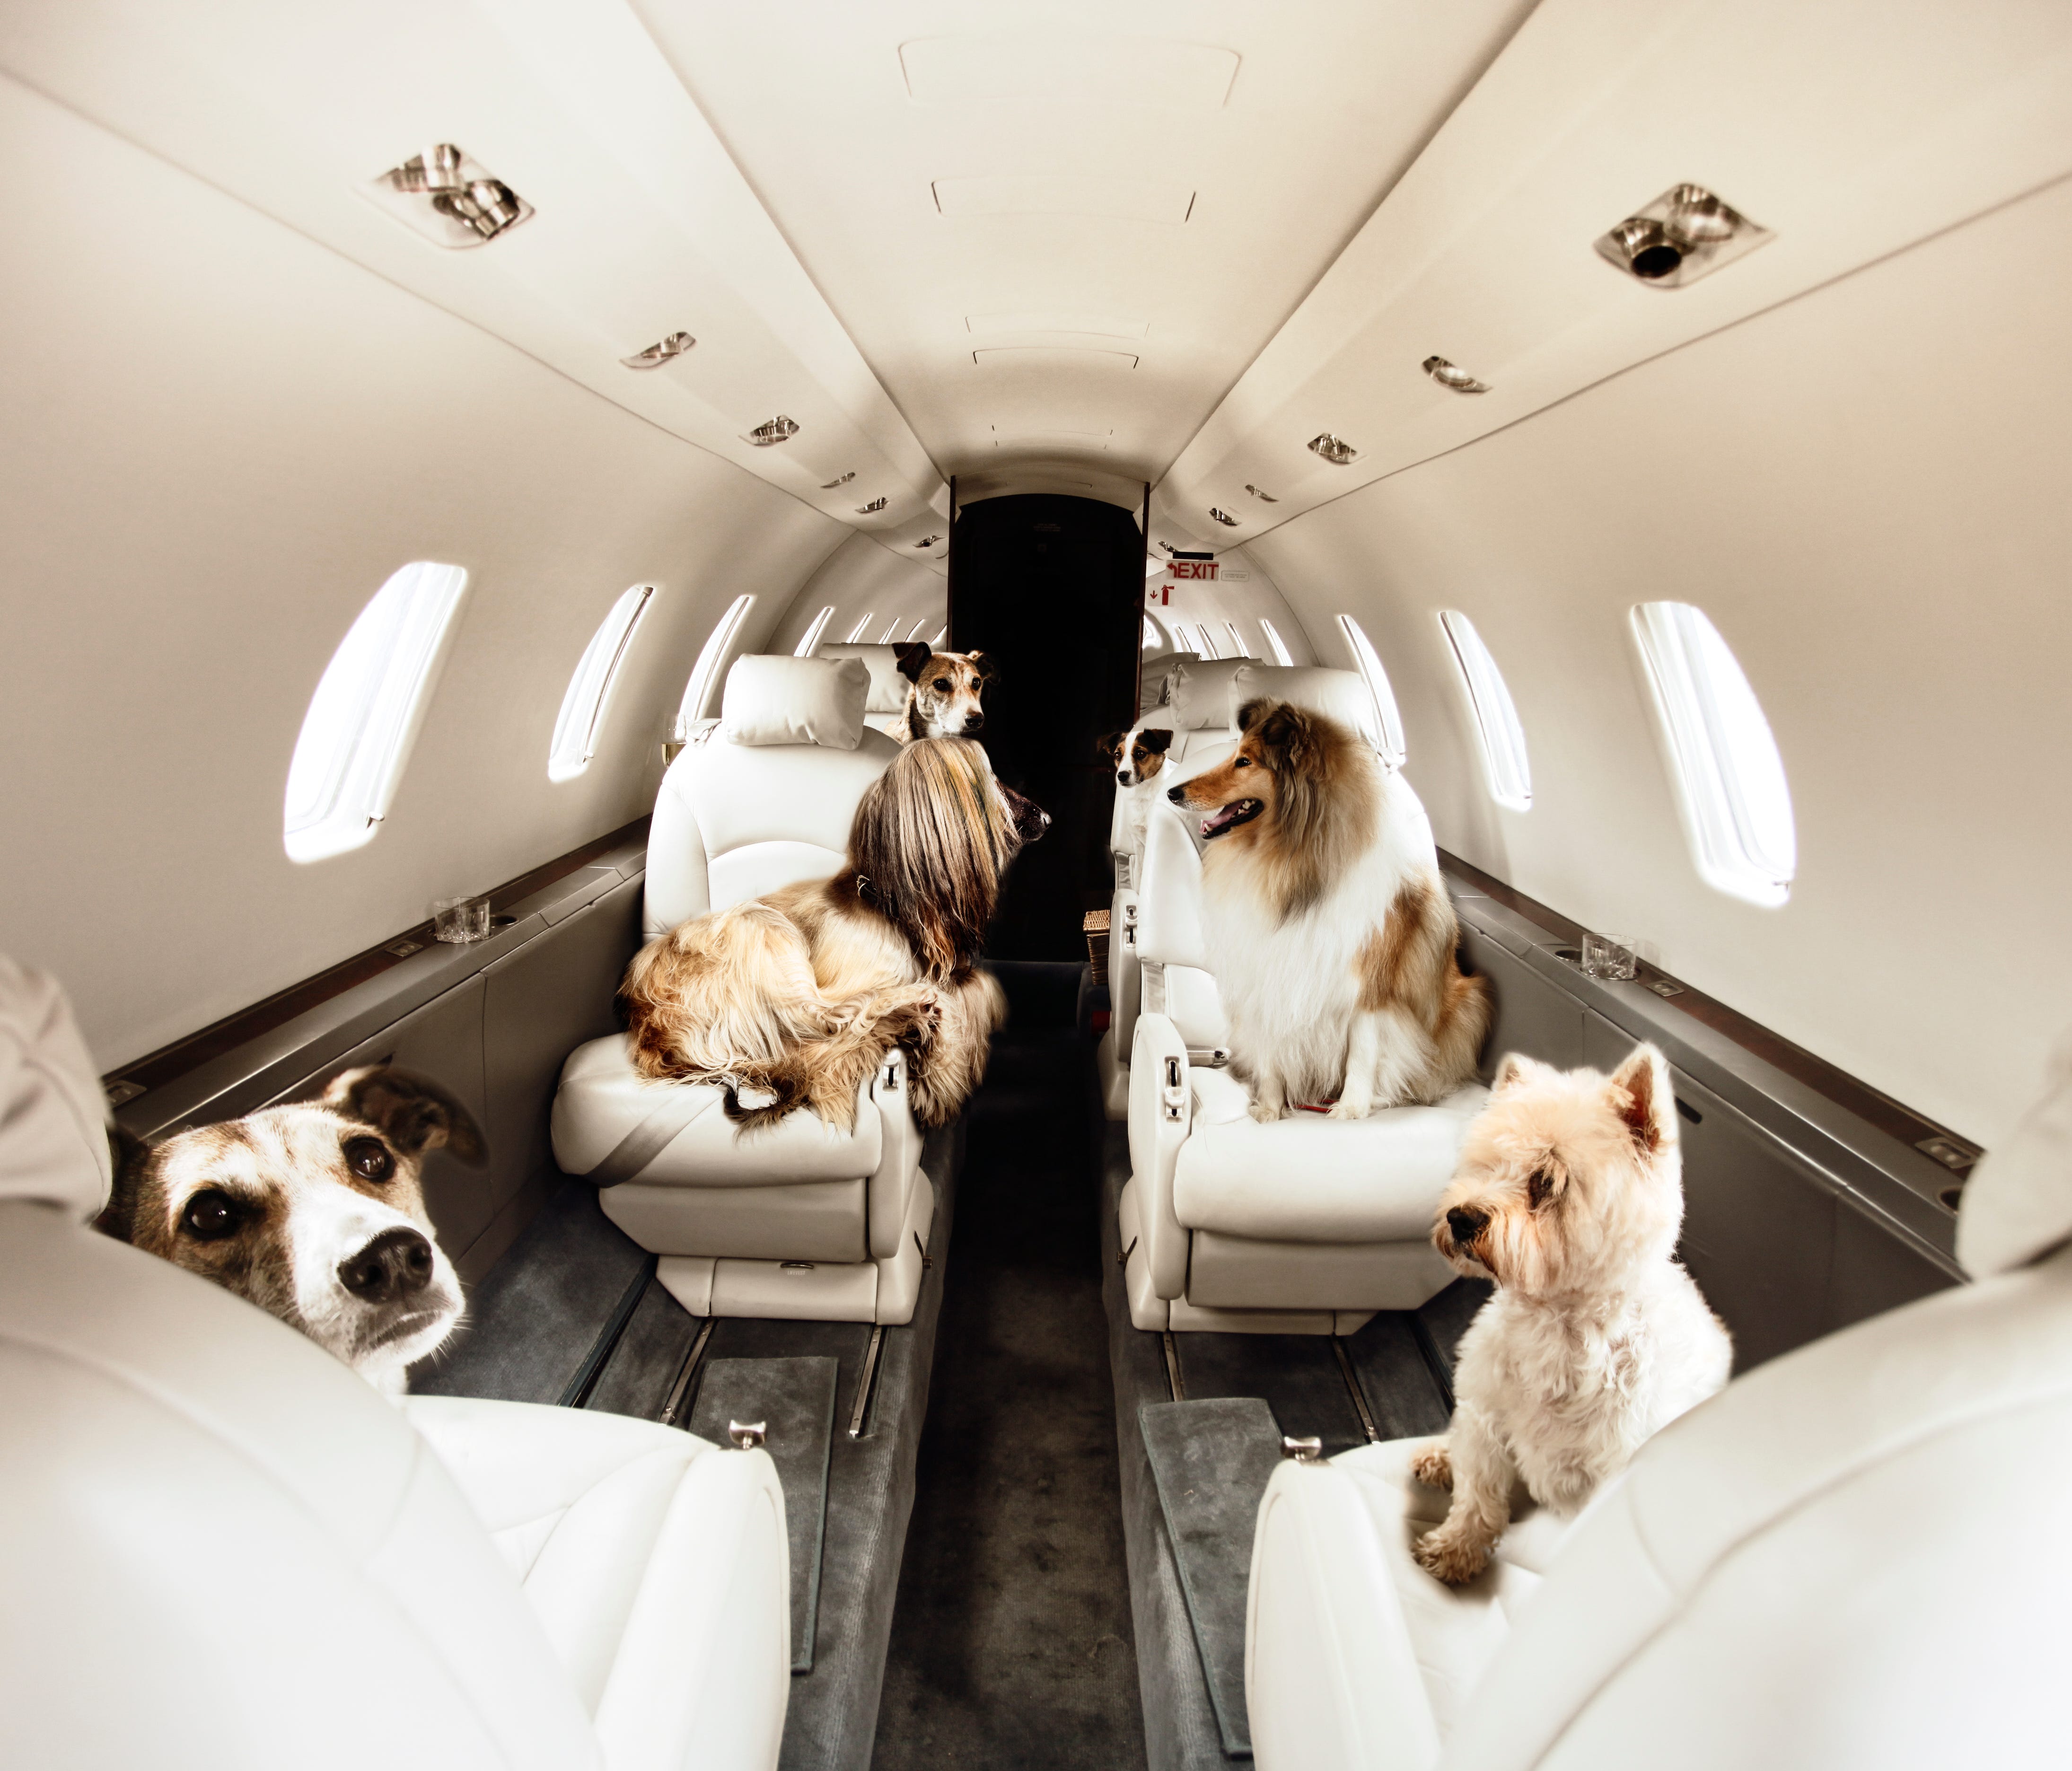 Victor, a private jet charter service, is now offering a 